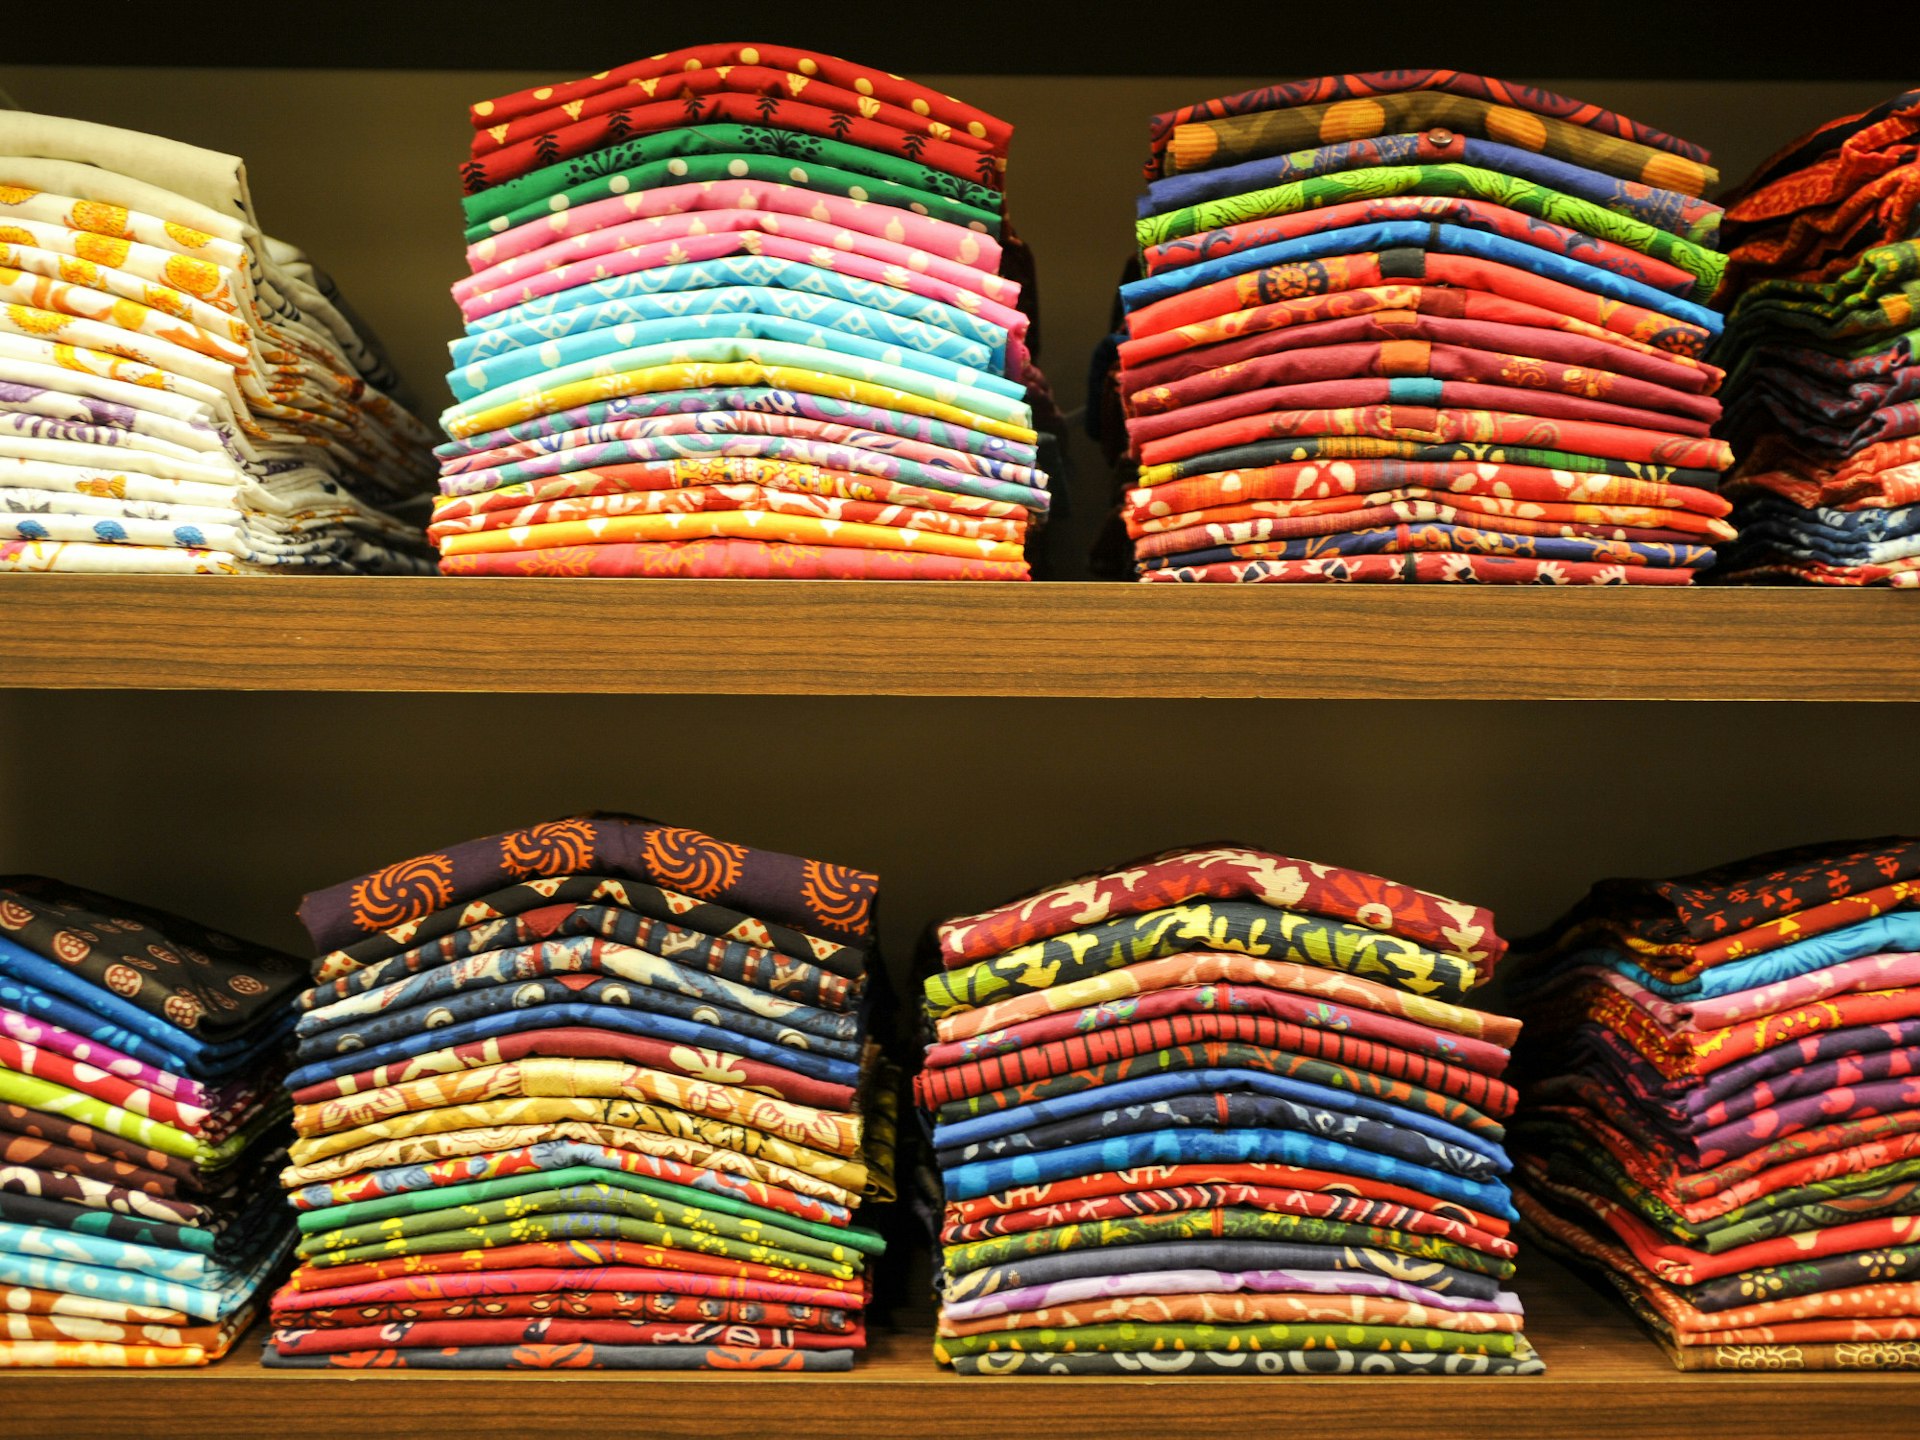 Colourful dupattas on sale in Mumbai. Image by fotoember / Getty Images